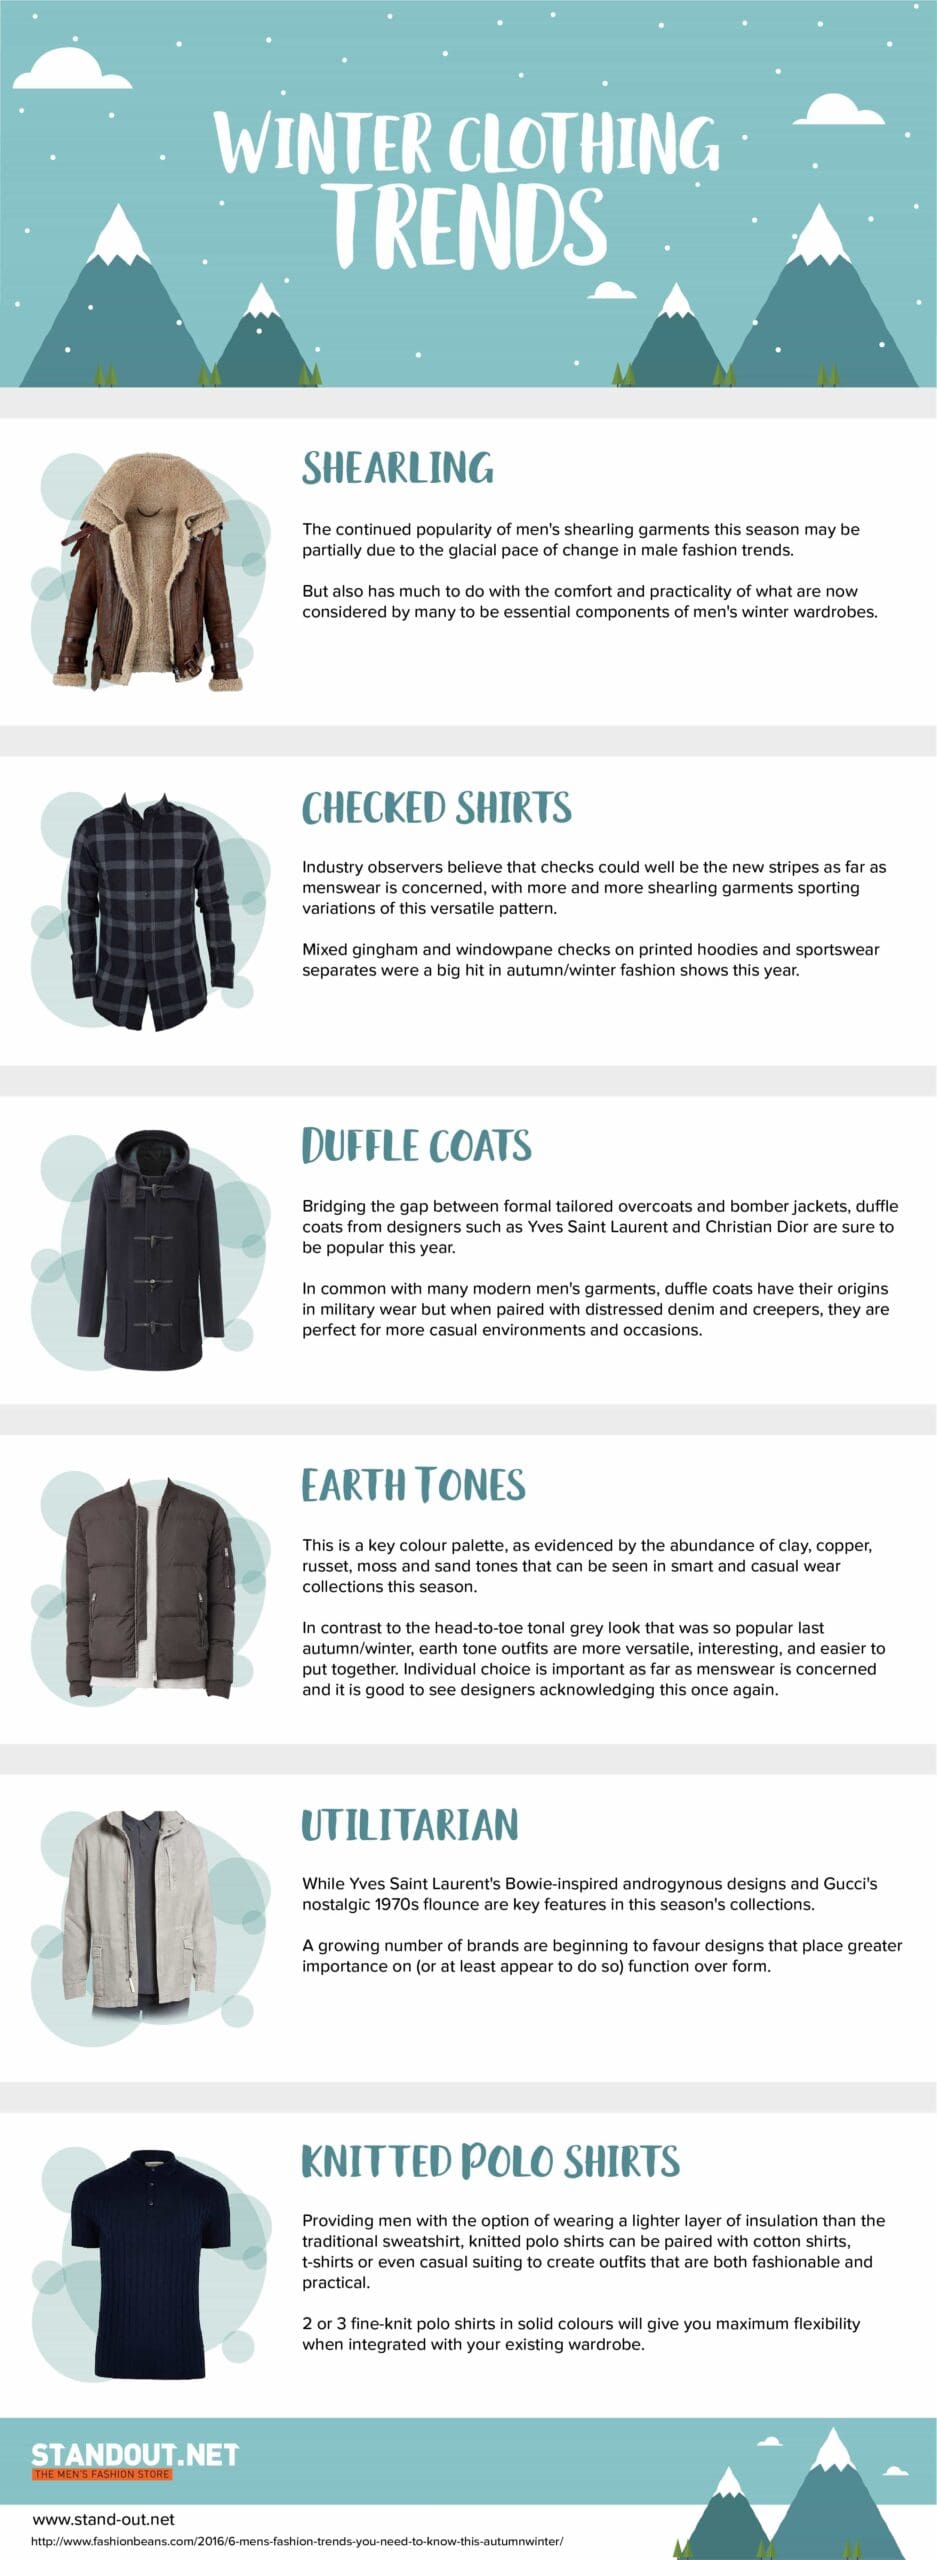 Winter Trends - Winter Clothing Trends